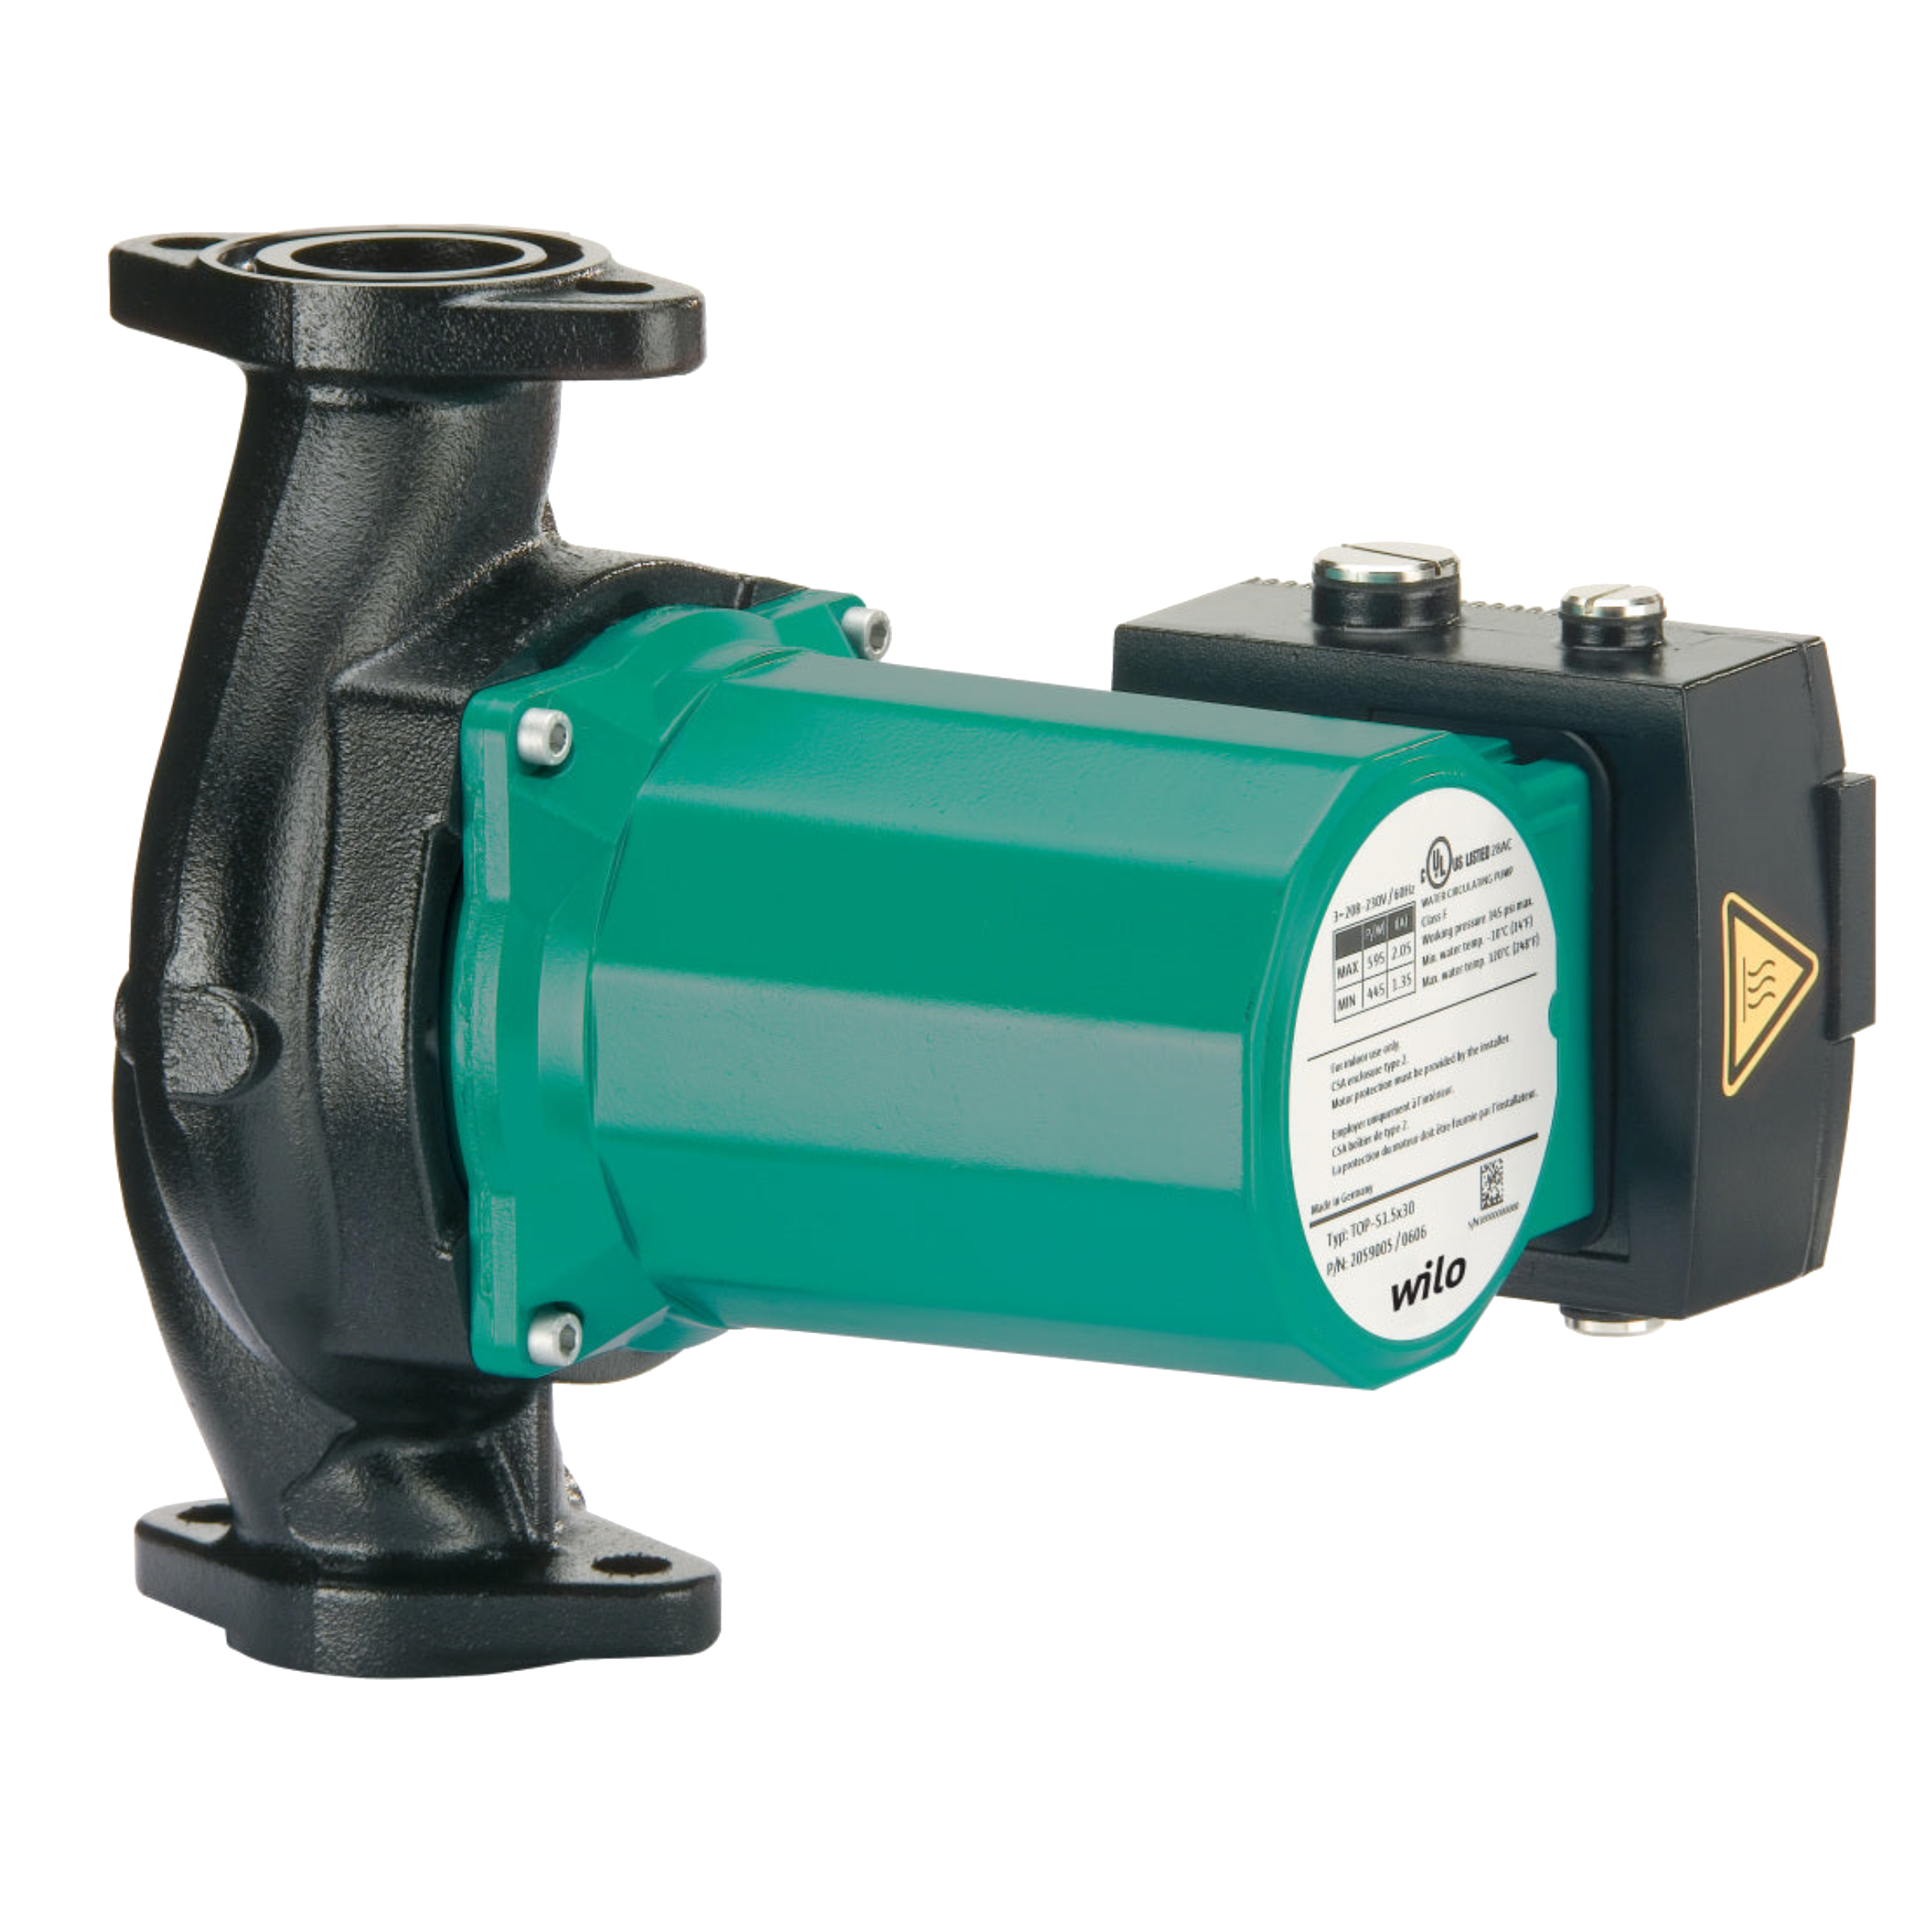 Top S 1.5 x 20 Wilo Top S Series 2-Speed Residential Circulating Pump, 1/4 HP, 145 Psi, Max Flow 70 USGPM, 115V/60Hz/1Ph